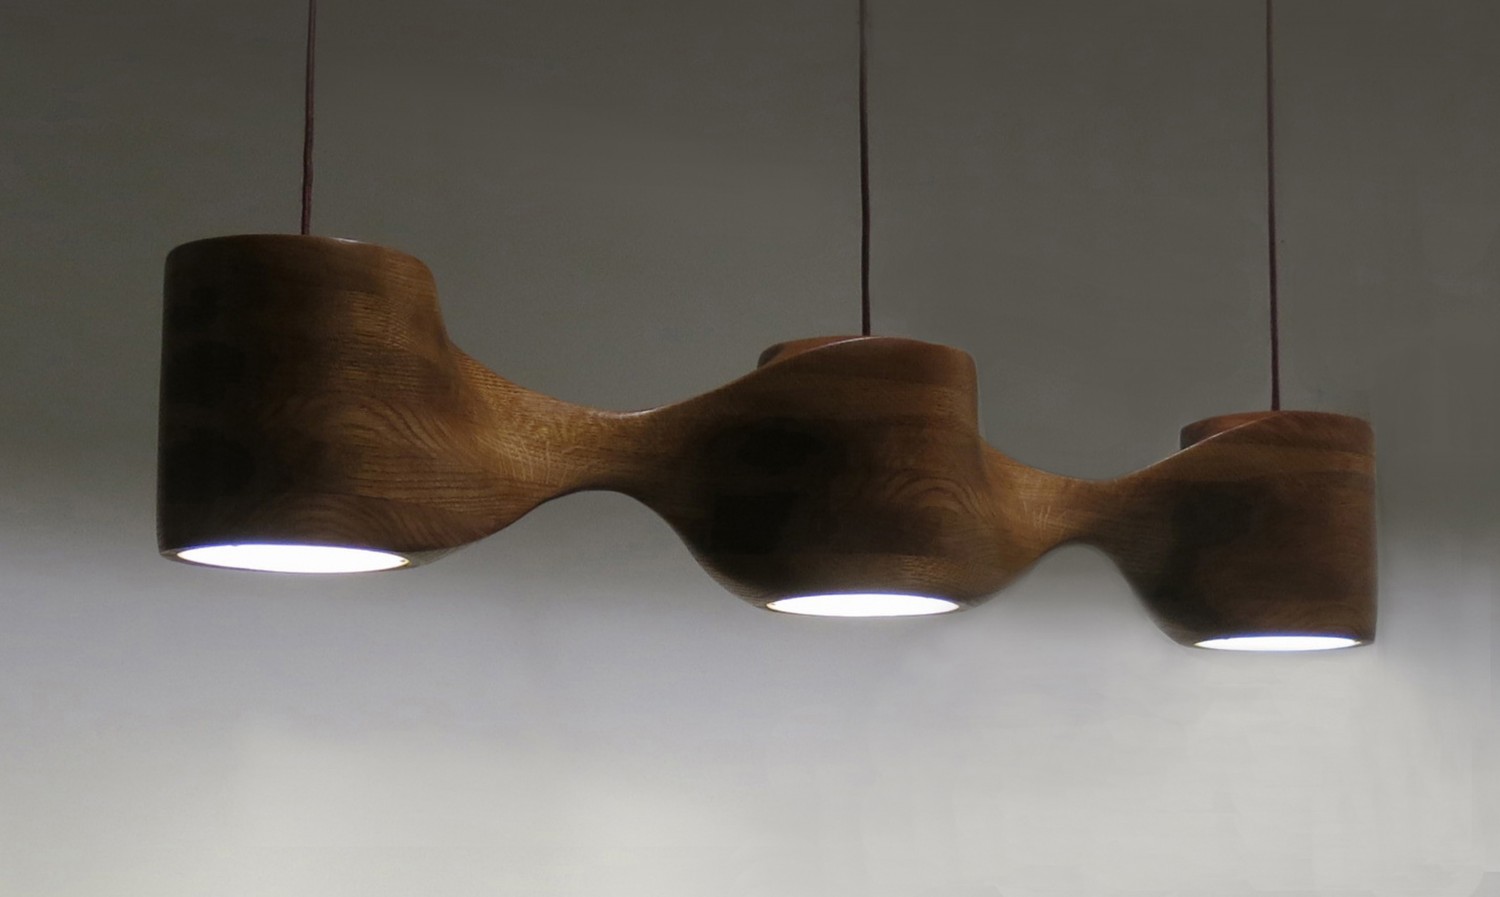 This photo shows a pendant light with three lamps made from oak, seen from three-quarters view